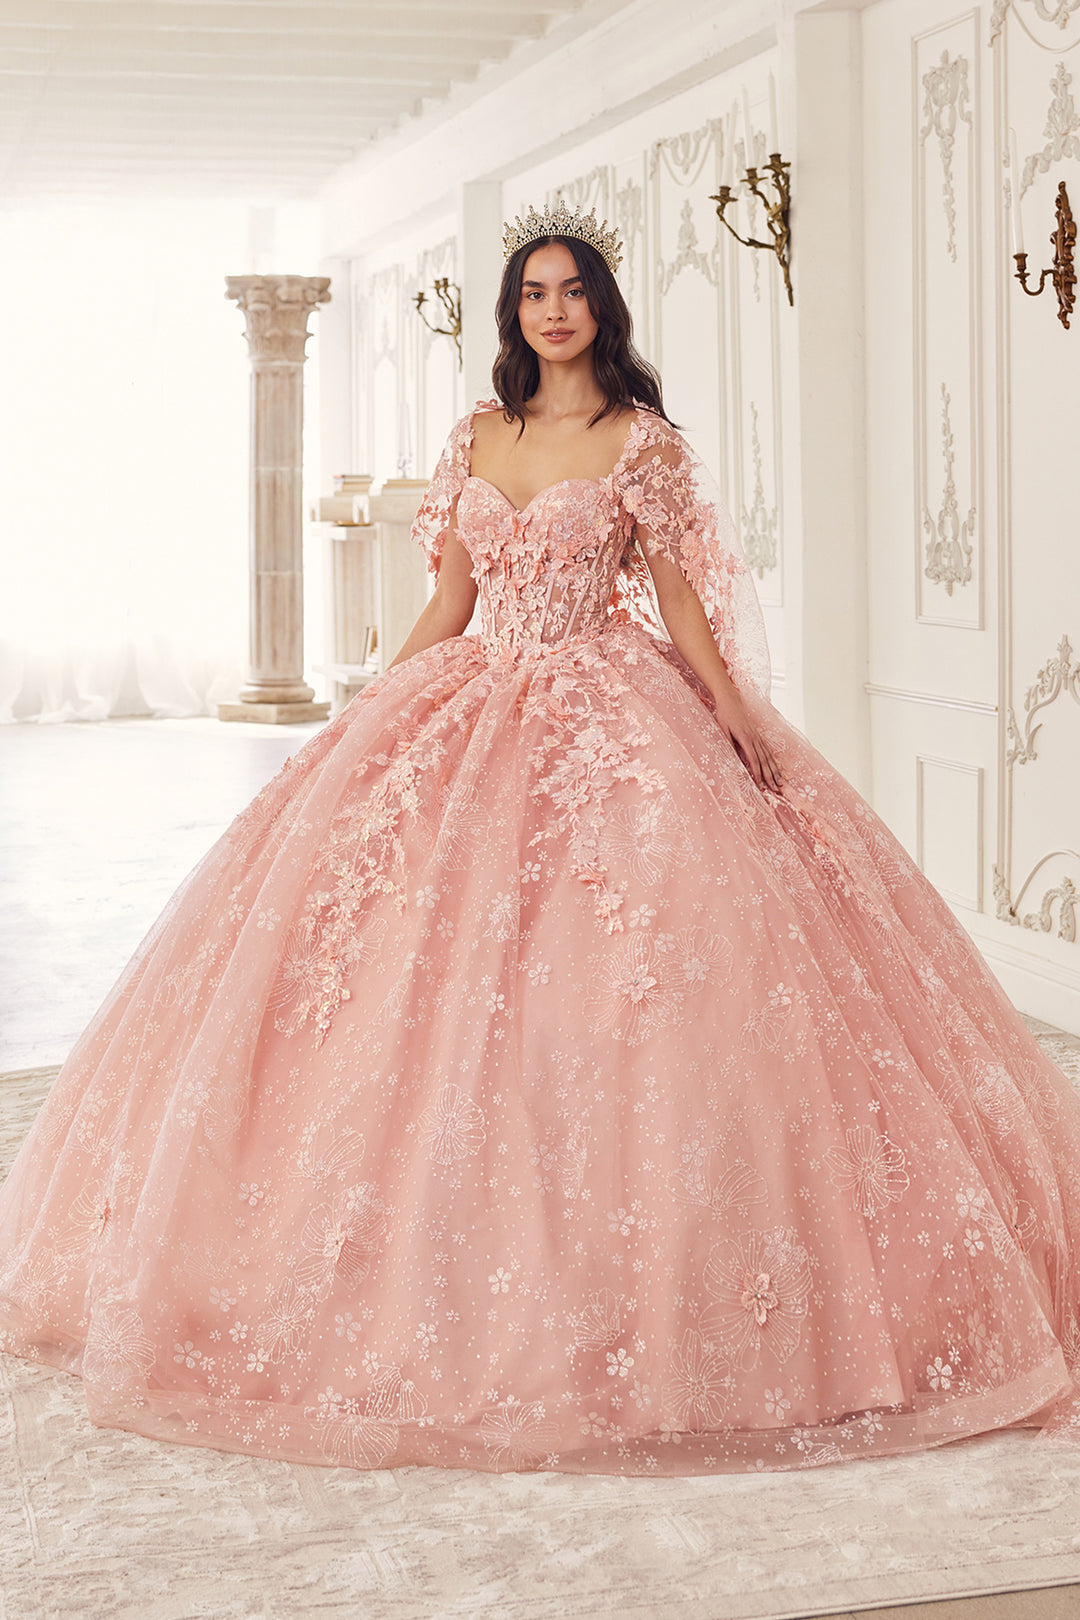 3D Floral Strapless Cape Ball Gown by Ladivine 15719